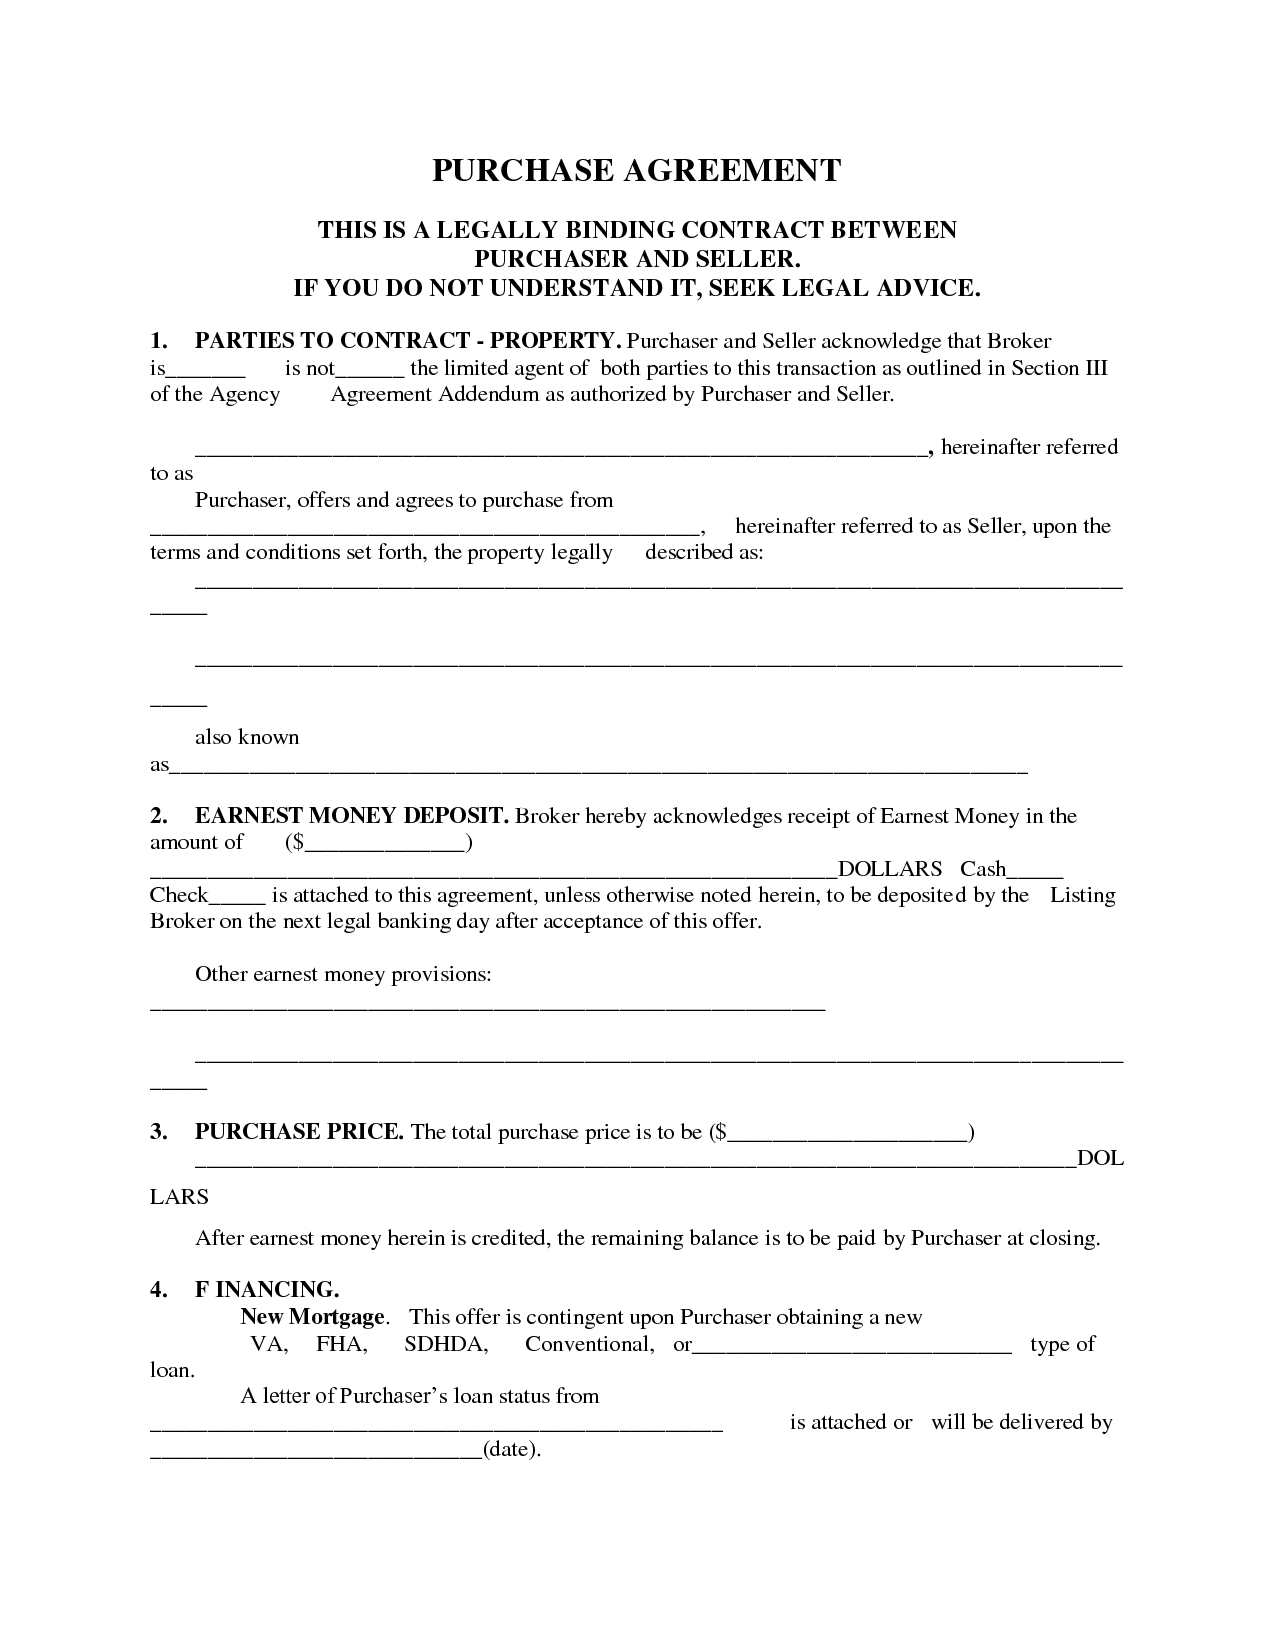 Land Purchase Agreement Template 004 Real Estate Purchase Agreement Template Ideas Best Agreements